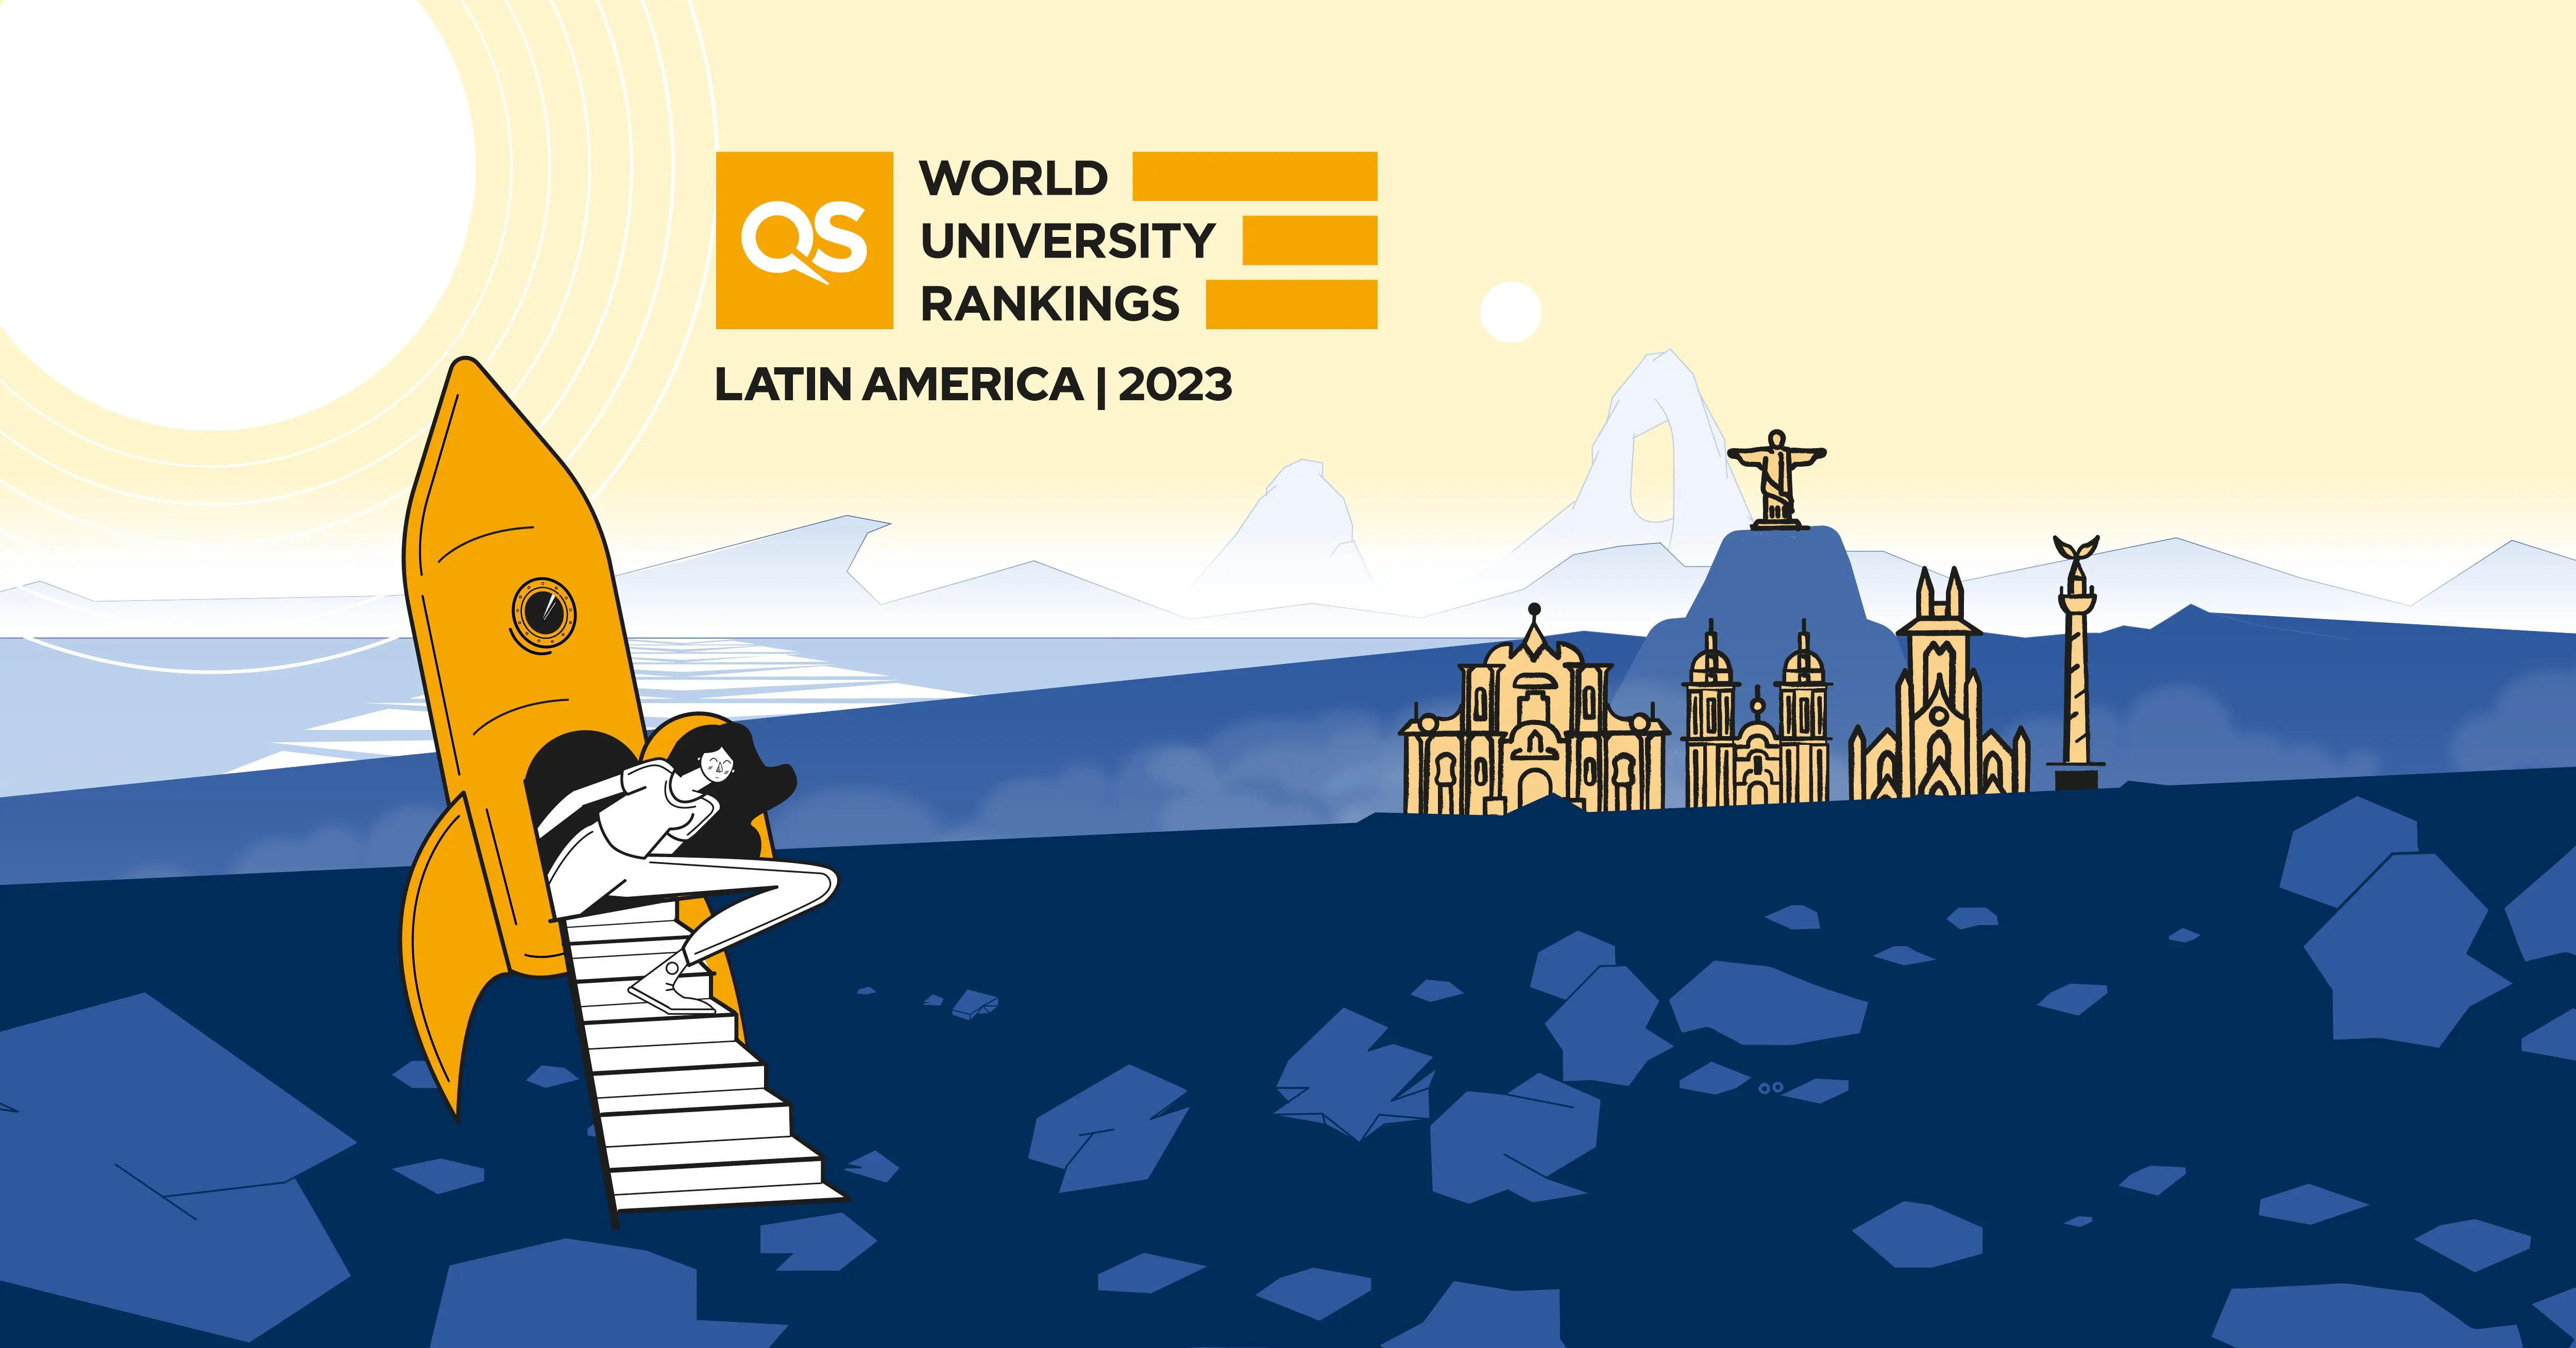 PUCRS elected the best private university in the Southern Region by QS Latin America